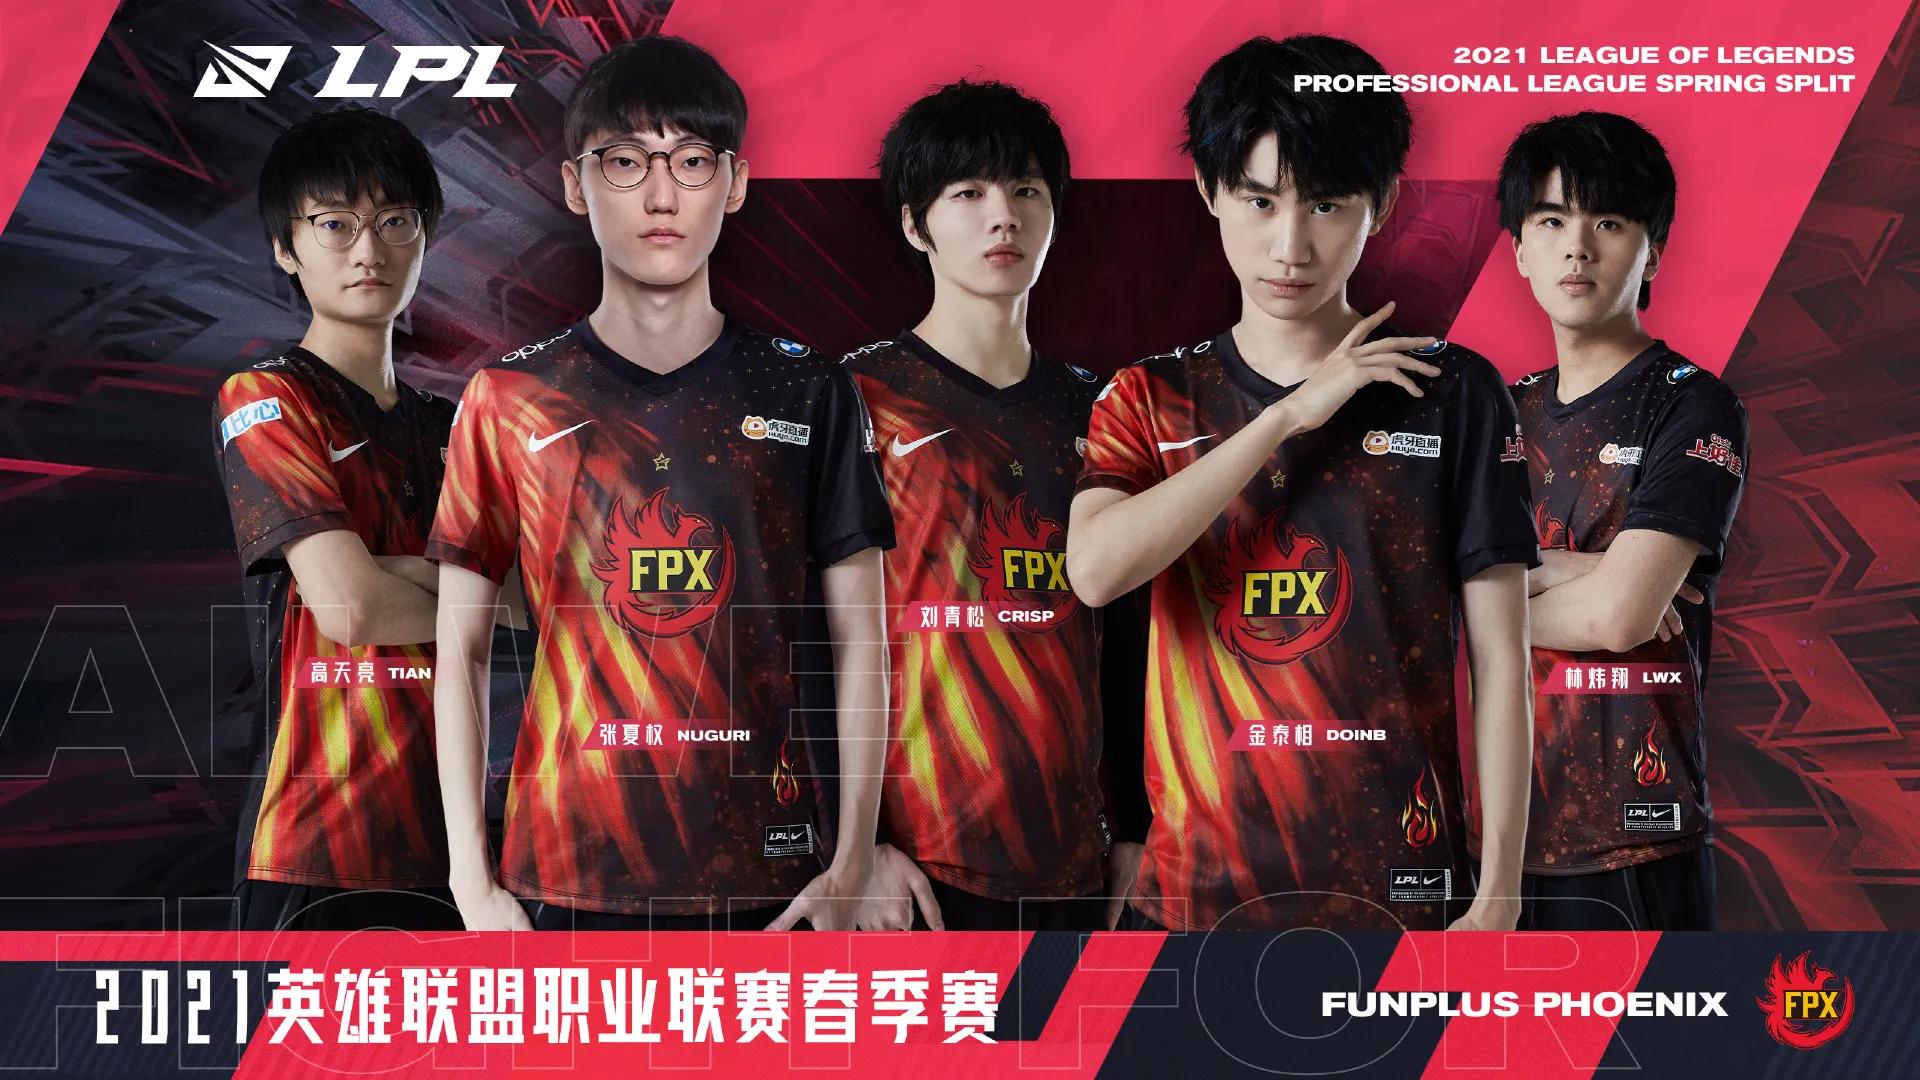 Analytic Lpl2021 spring surpasses actual strength of each battle group